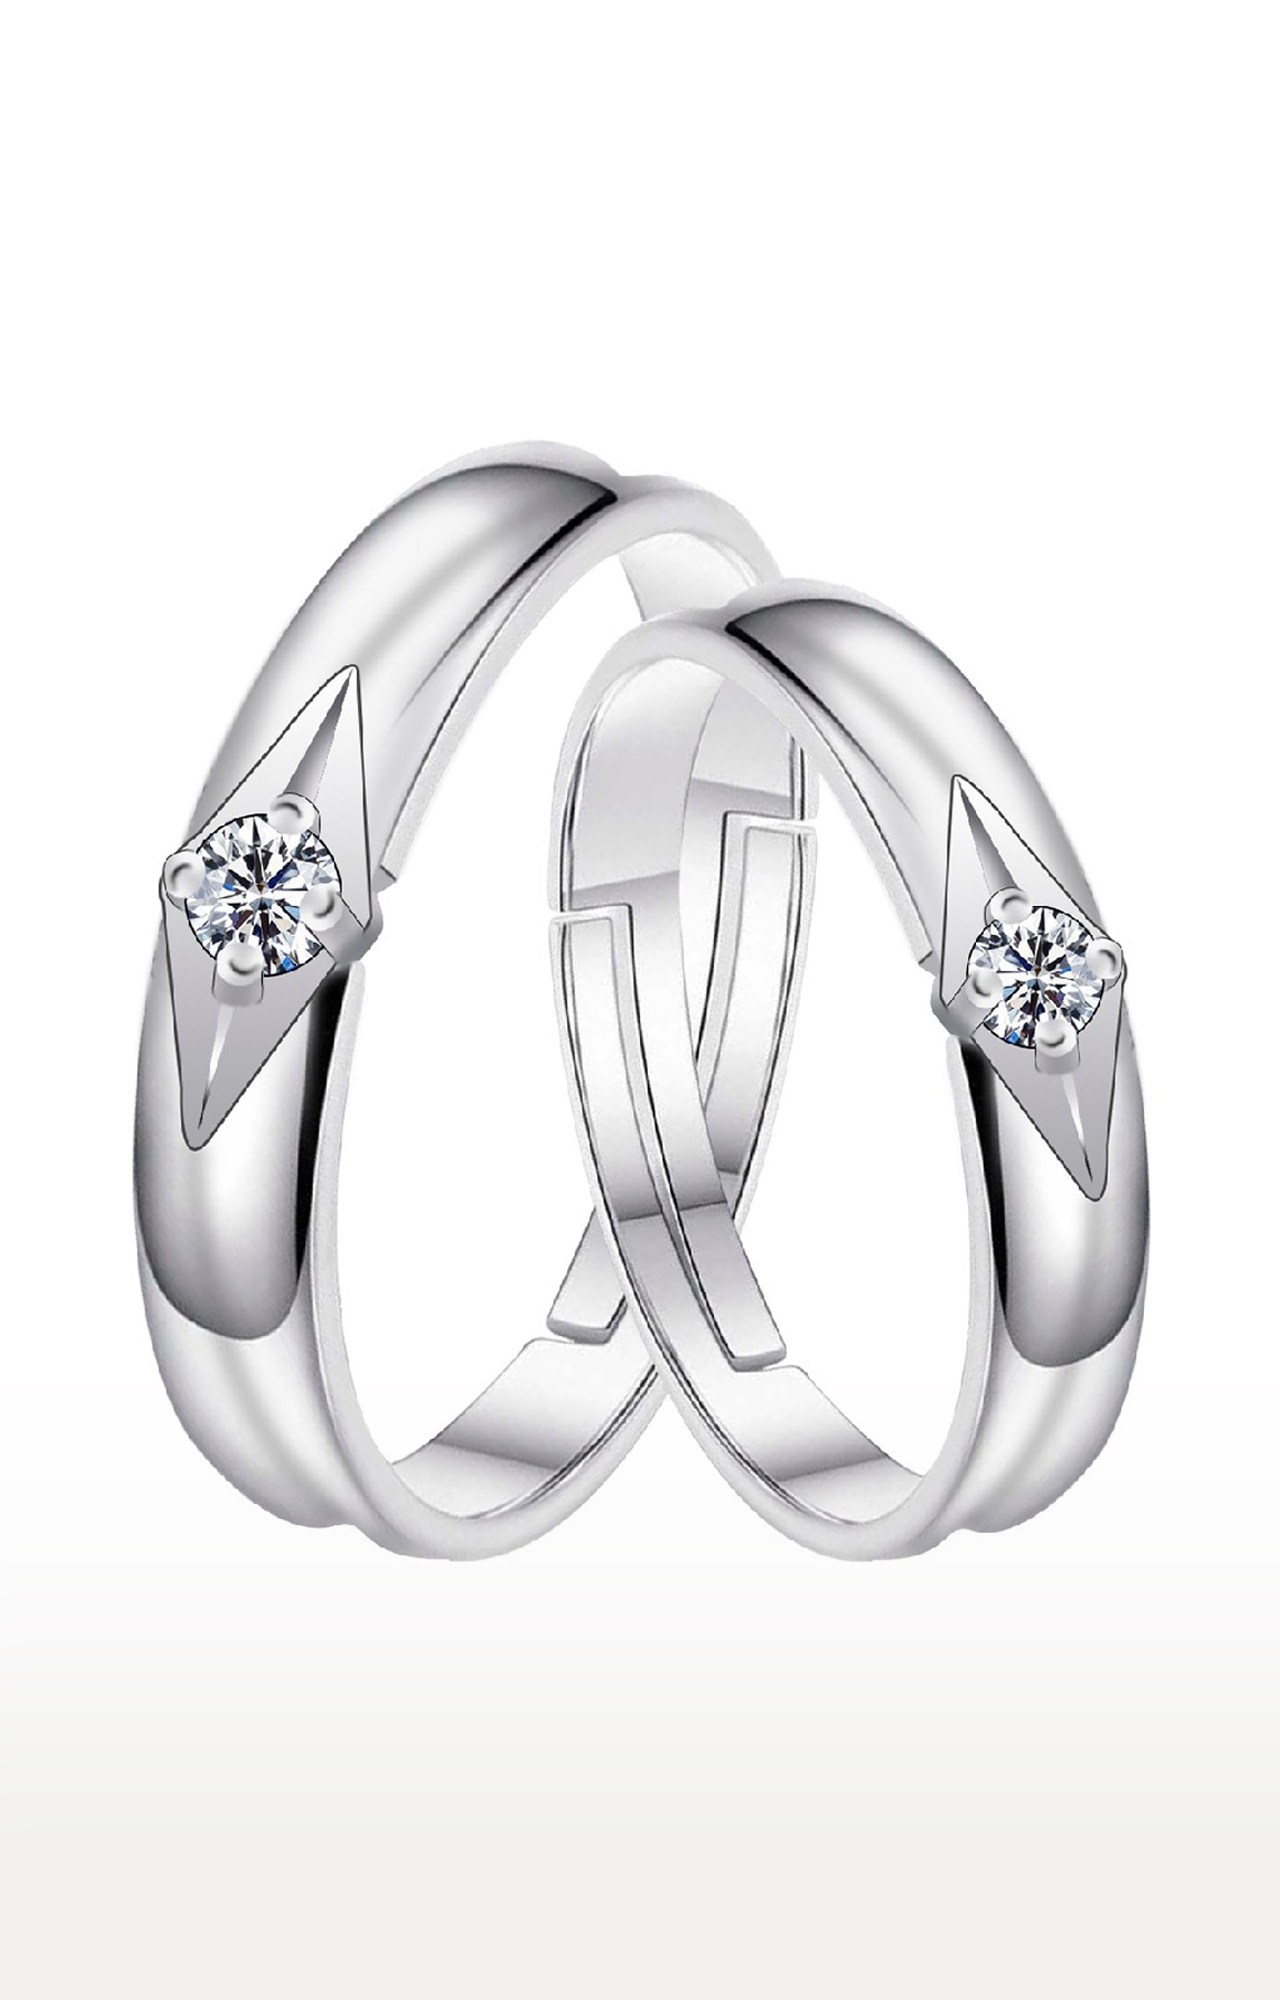 SILVER SHINE | Adjustable Couple Rings Set for lovers Silver Plated Solitaire for Men and Women-2 pieces 0